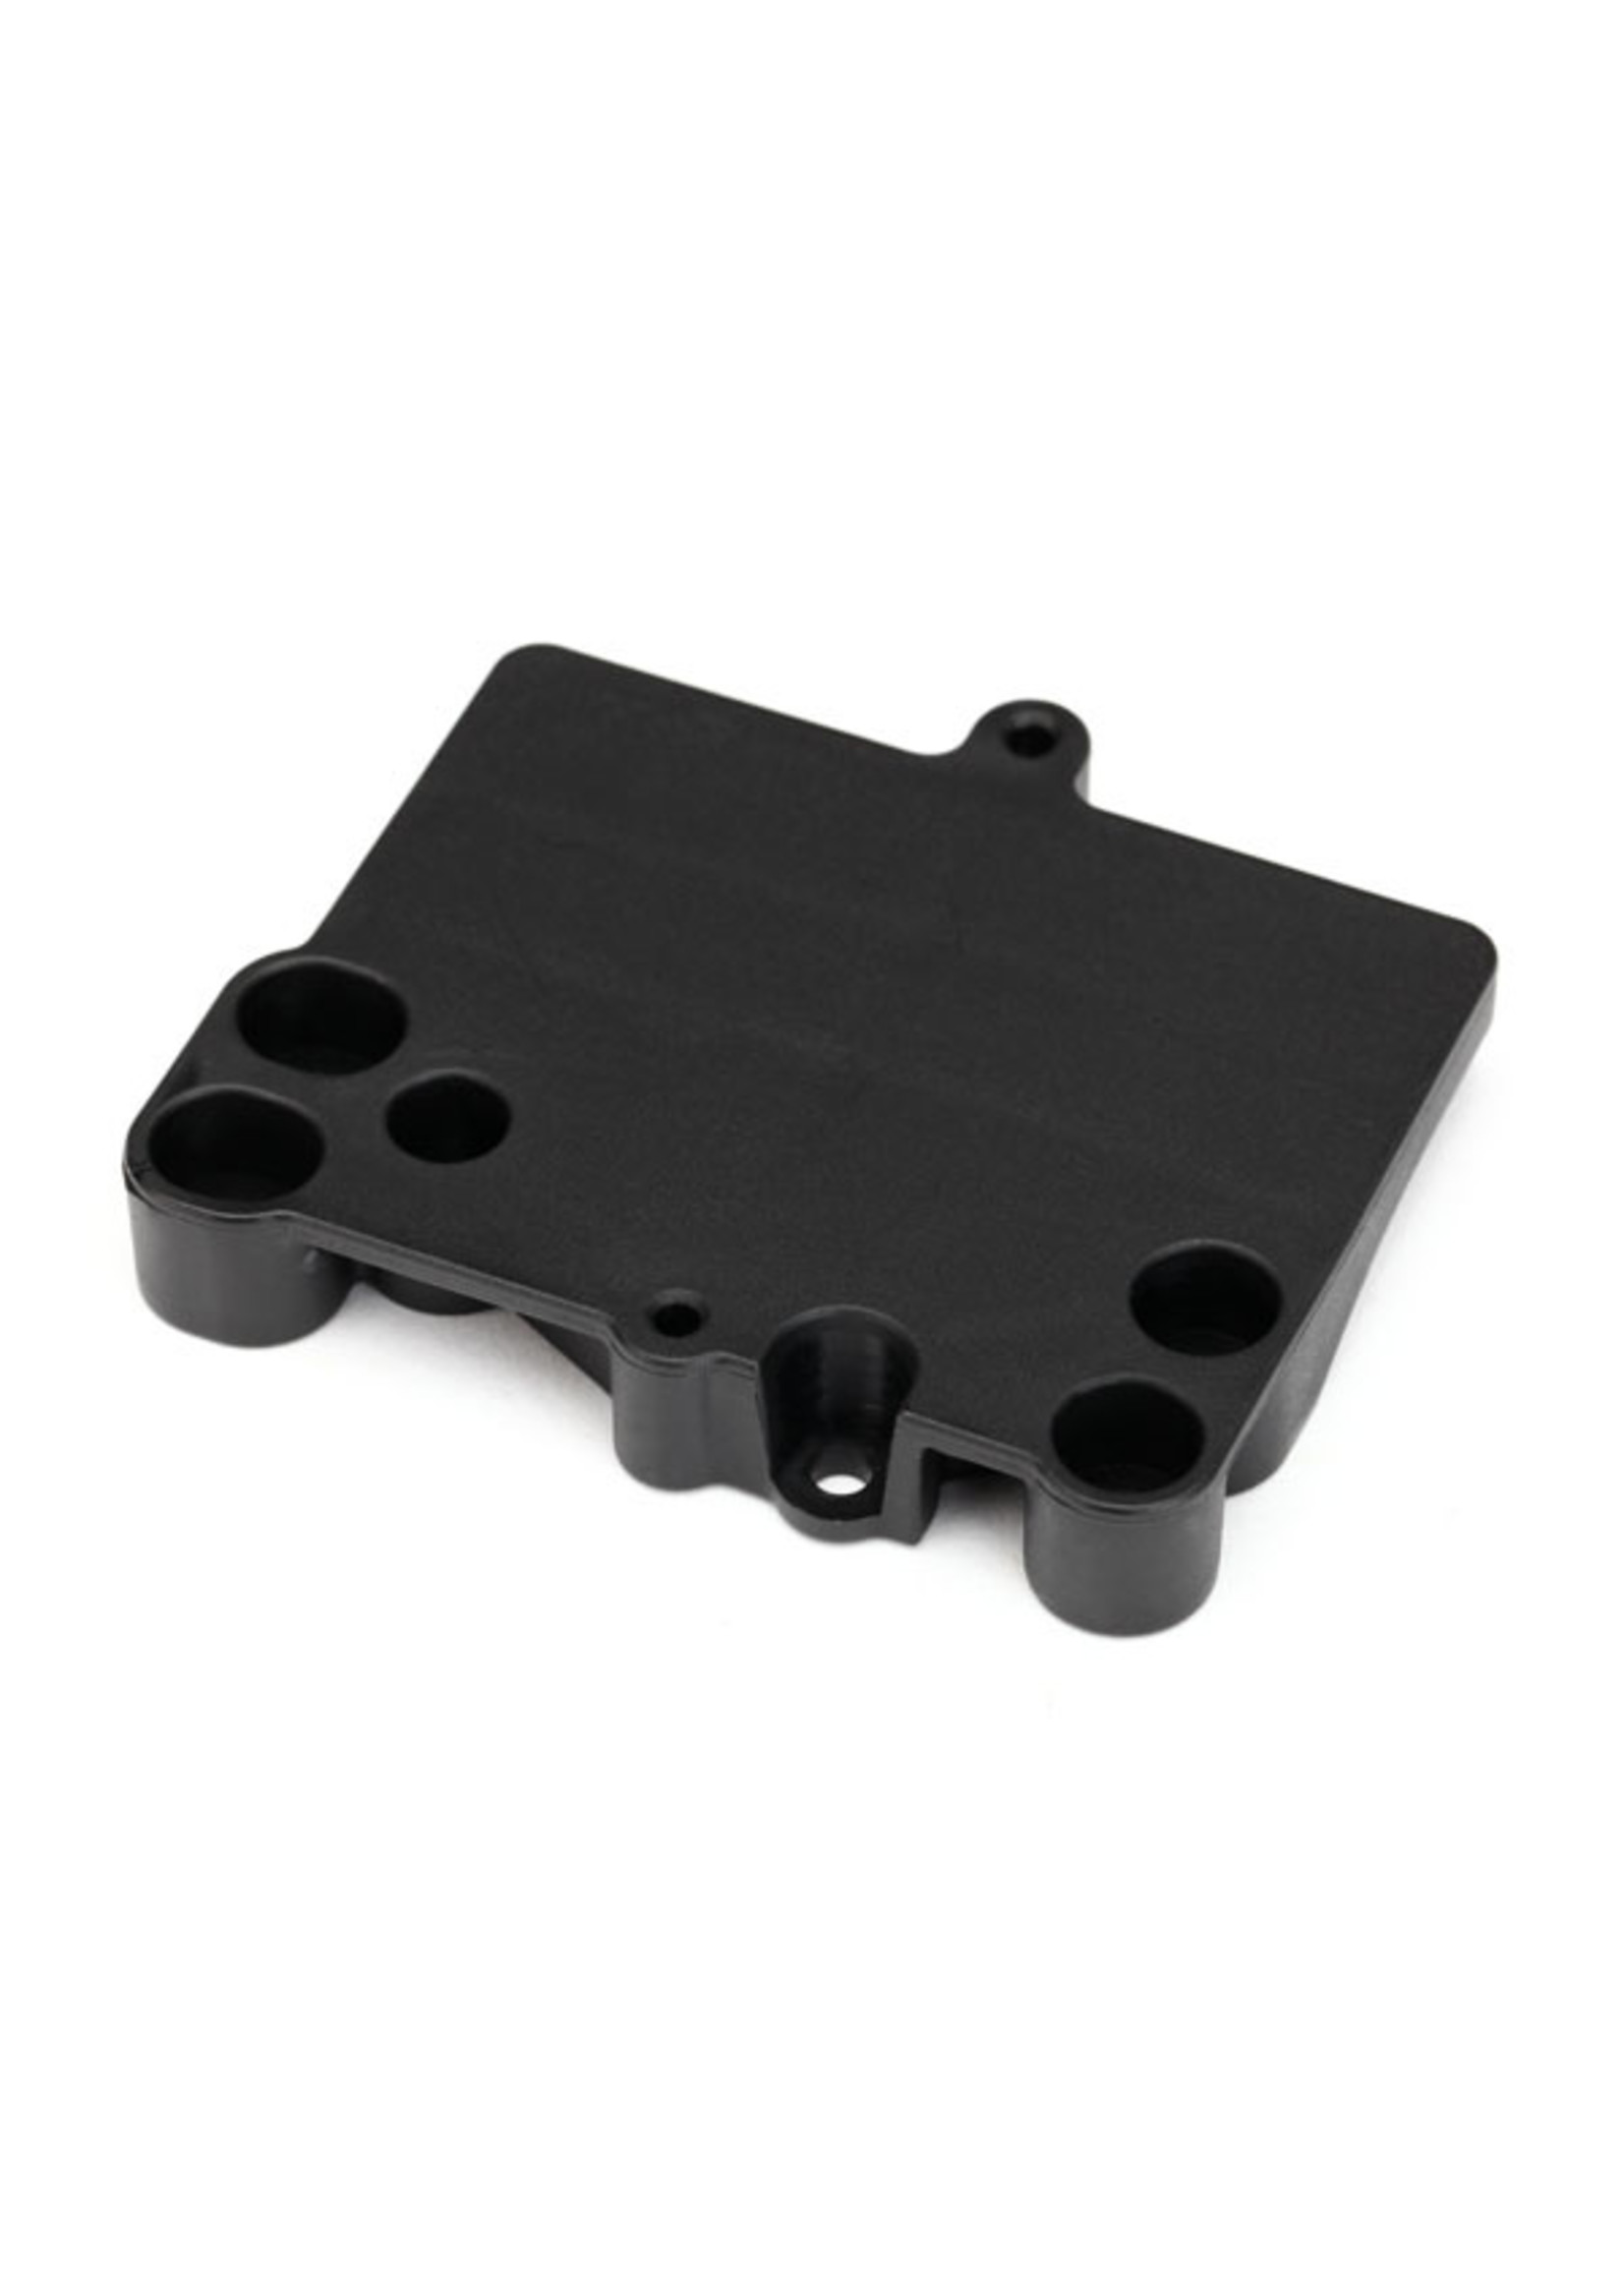 Traxxas 3725 - Speed Control Mounting Plate for Bandit, Rustler, Stampede